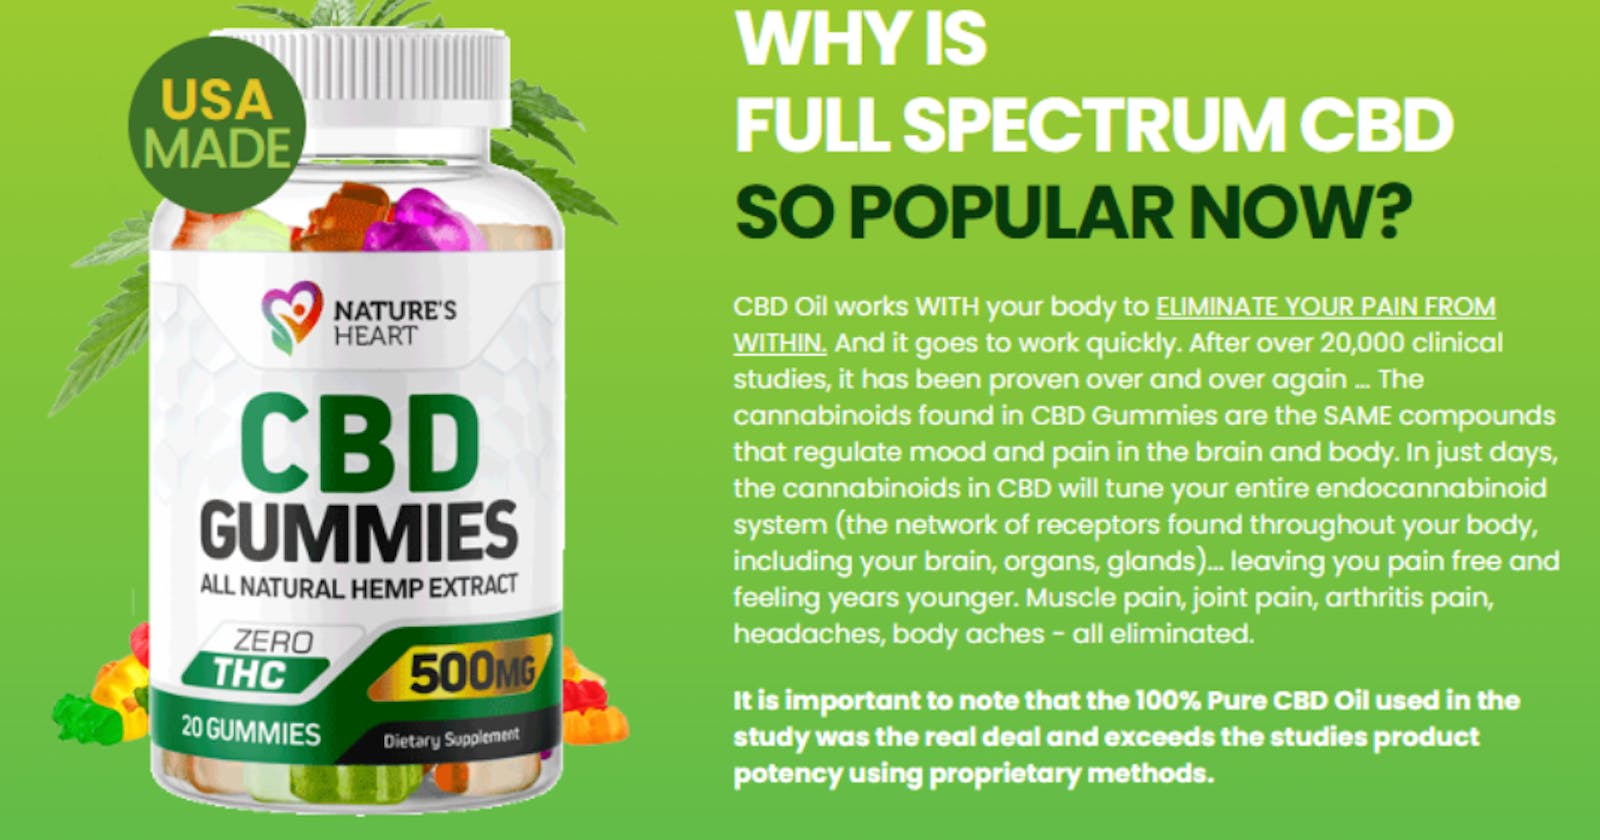 Nature's Heart CBD Gummies Reviews: Benefits, Side Effect, Price & How Does It Work?